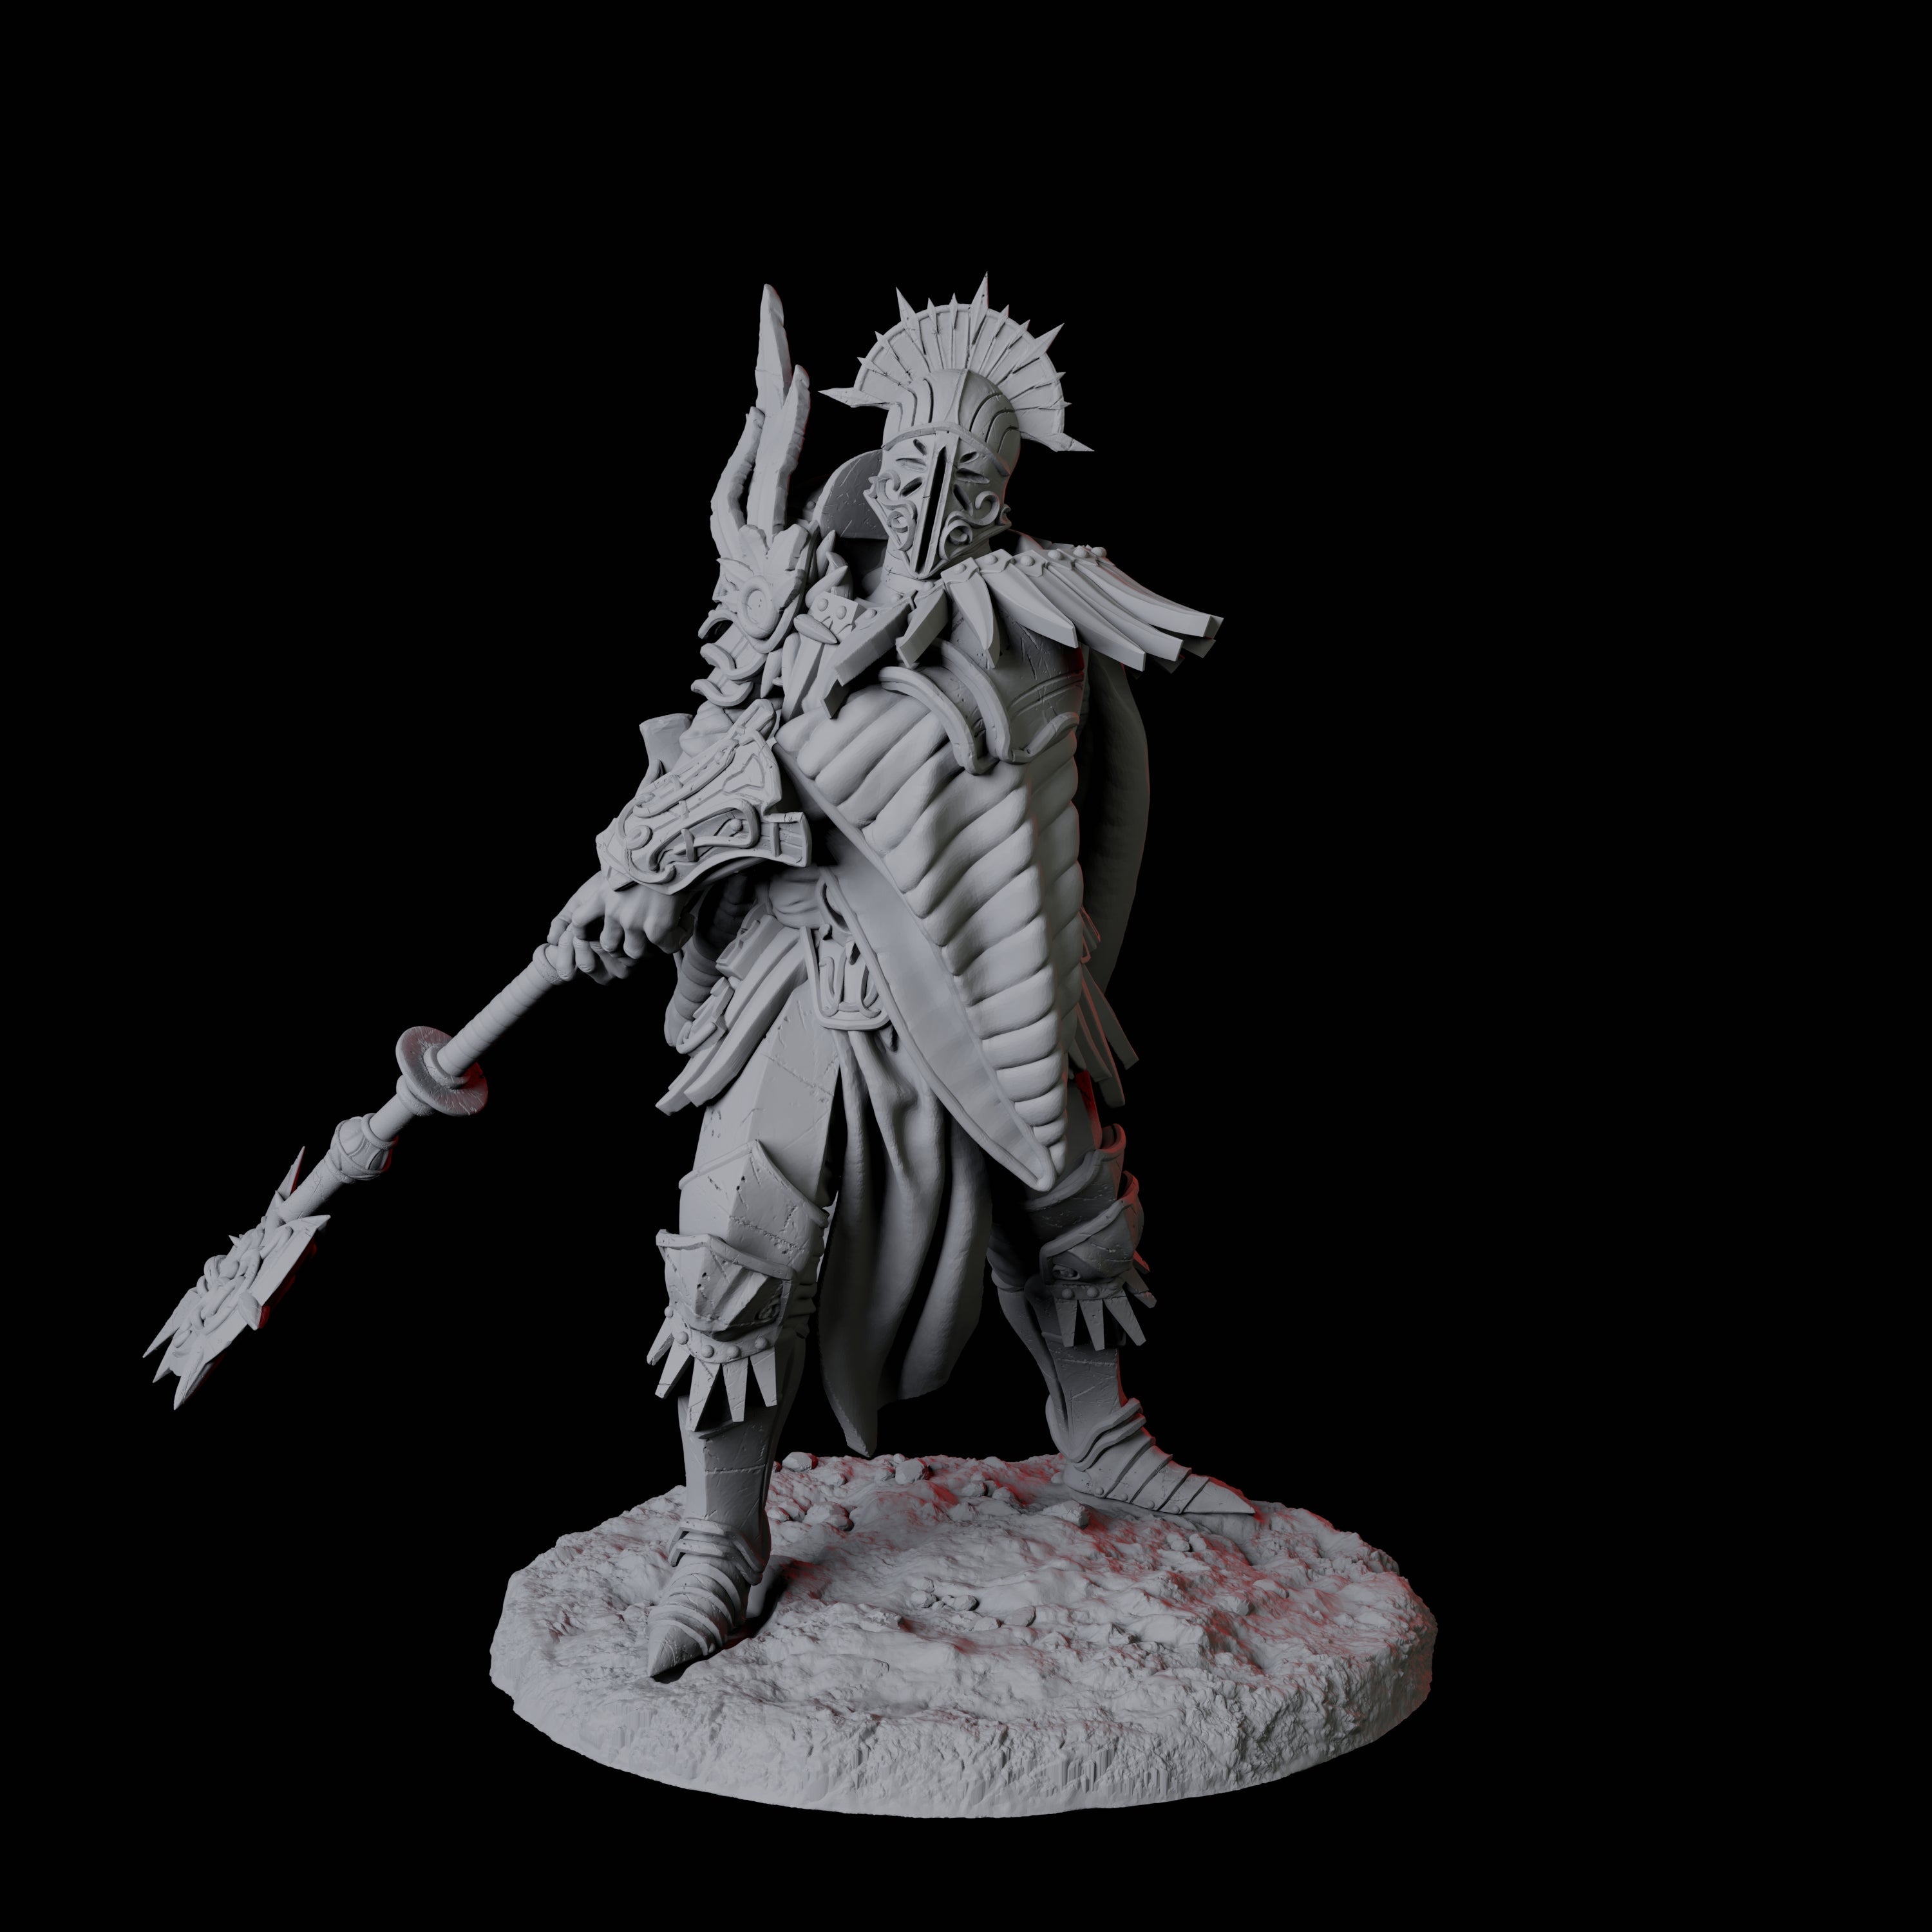 Powerful Legion Archon C Miniature for Dungeons and Dragons, Pathfinder or other TTRPGs